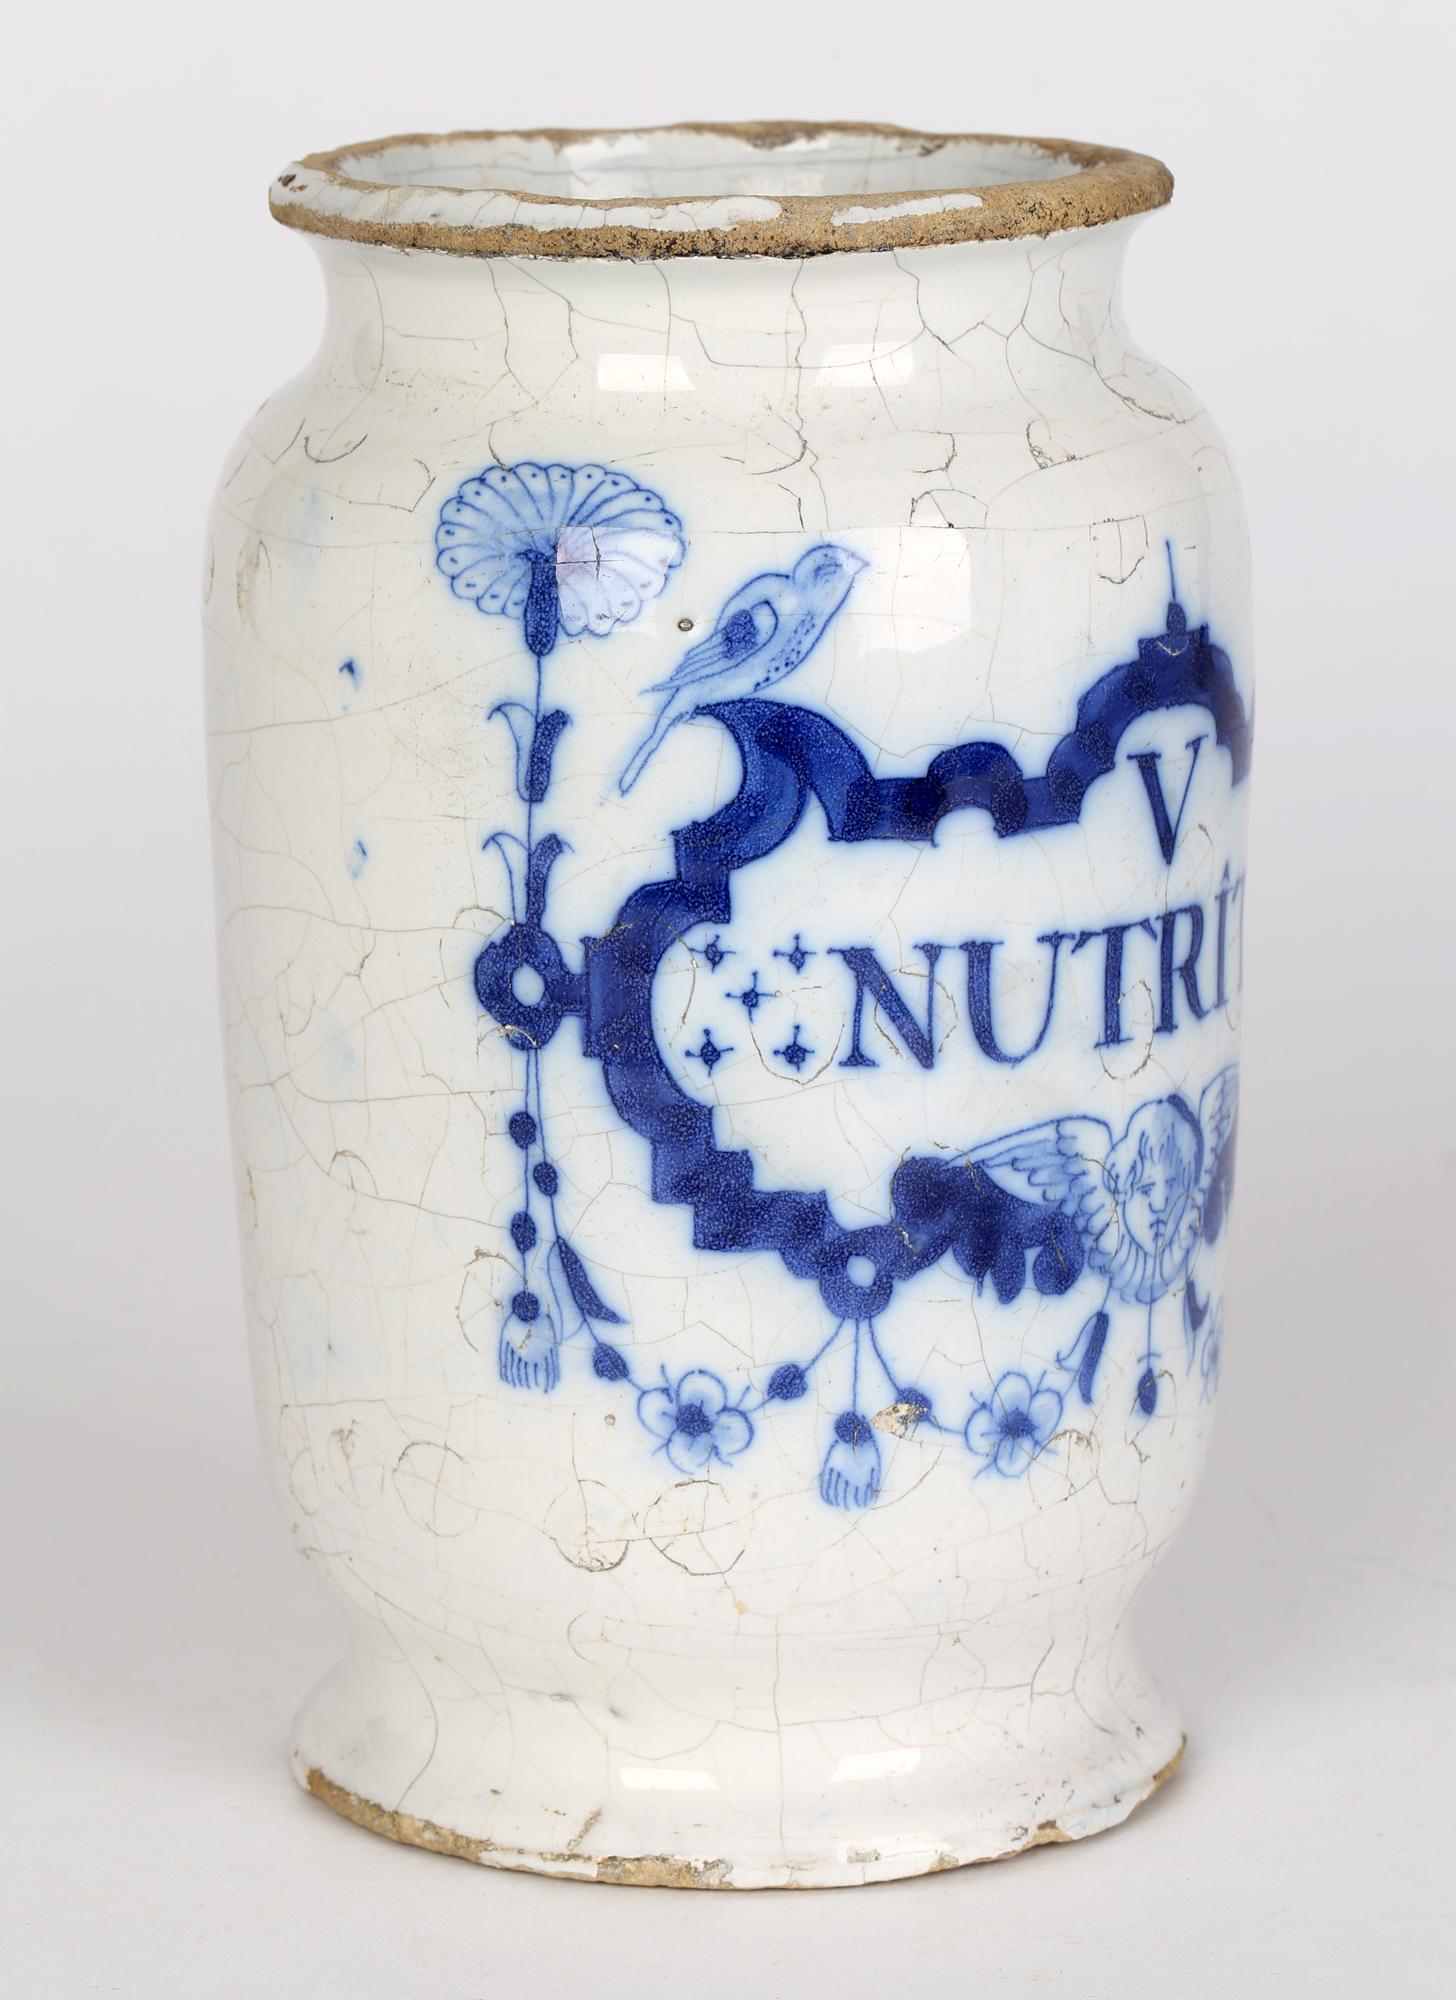 Delft Pottery Early 18th Century Apothecary Jar Marked Nutritum 10